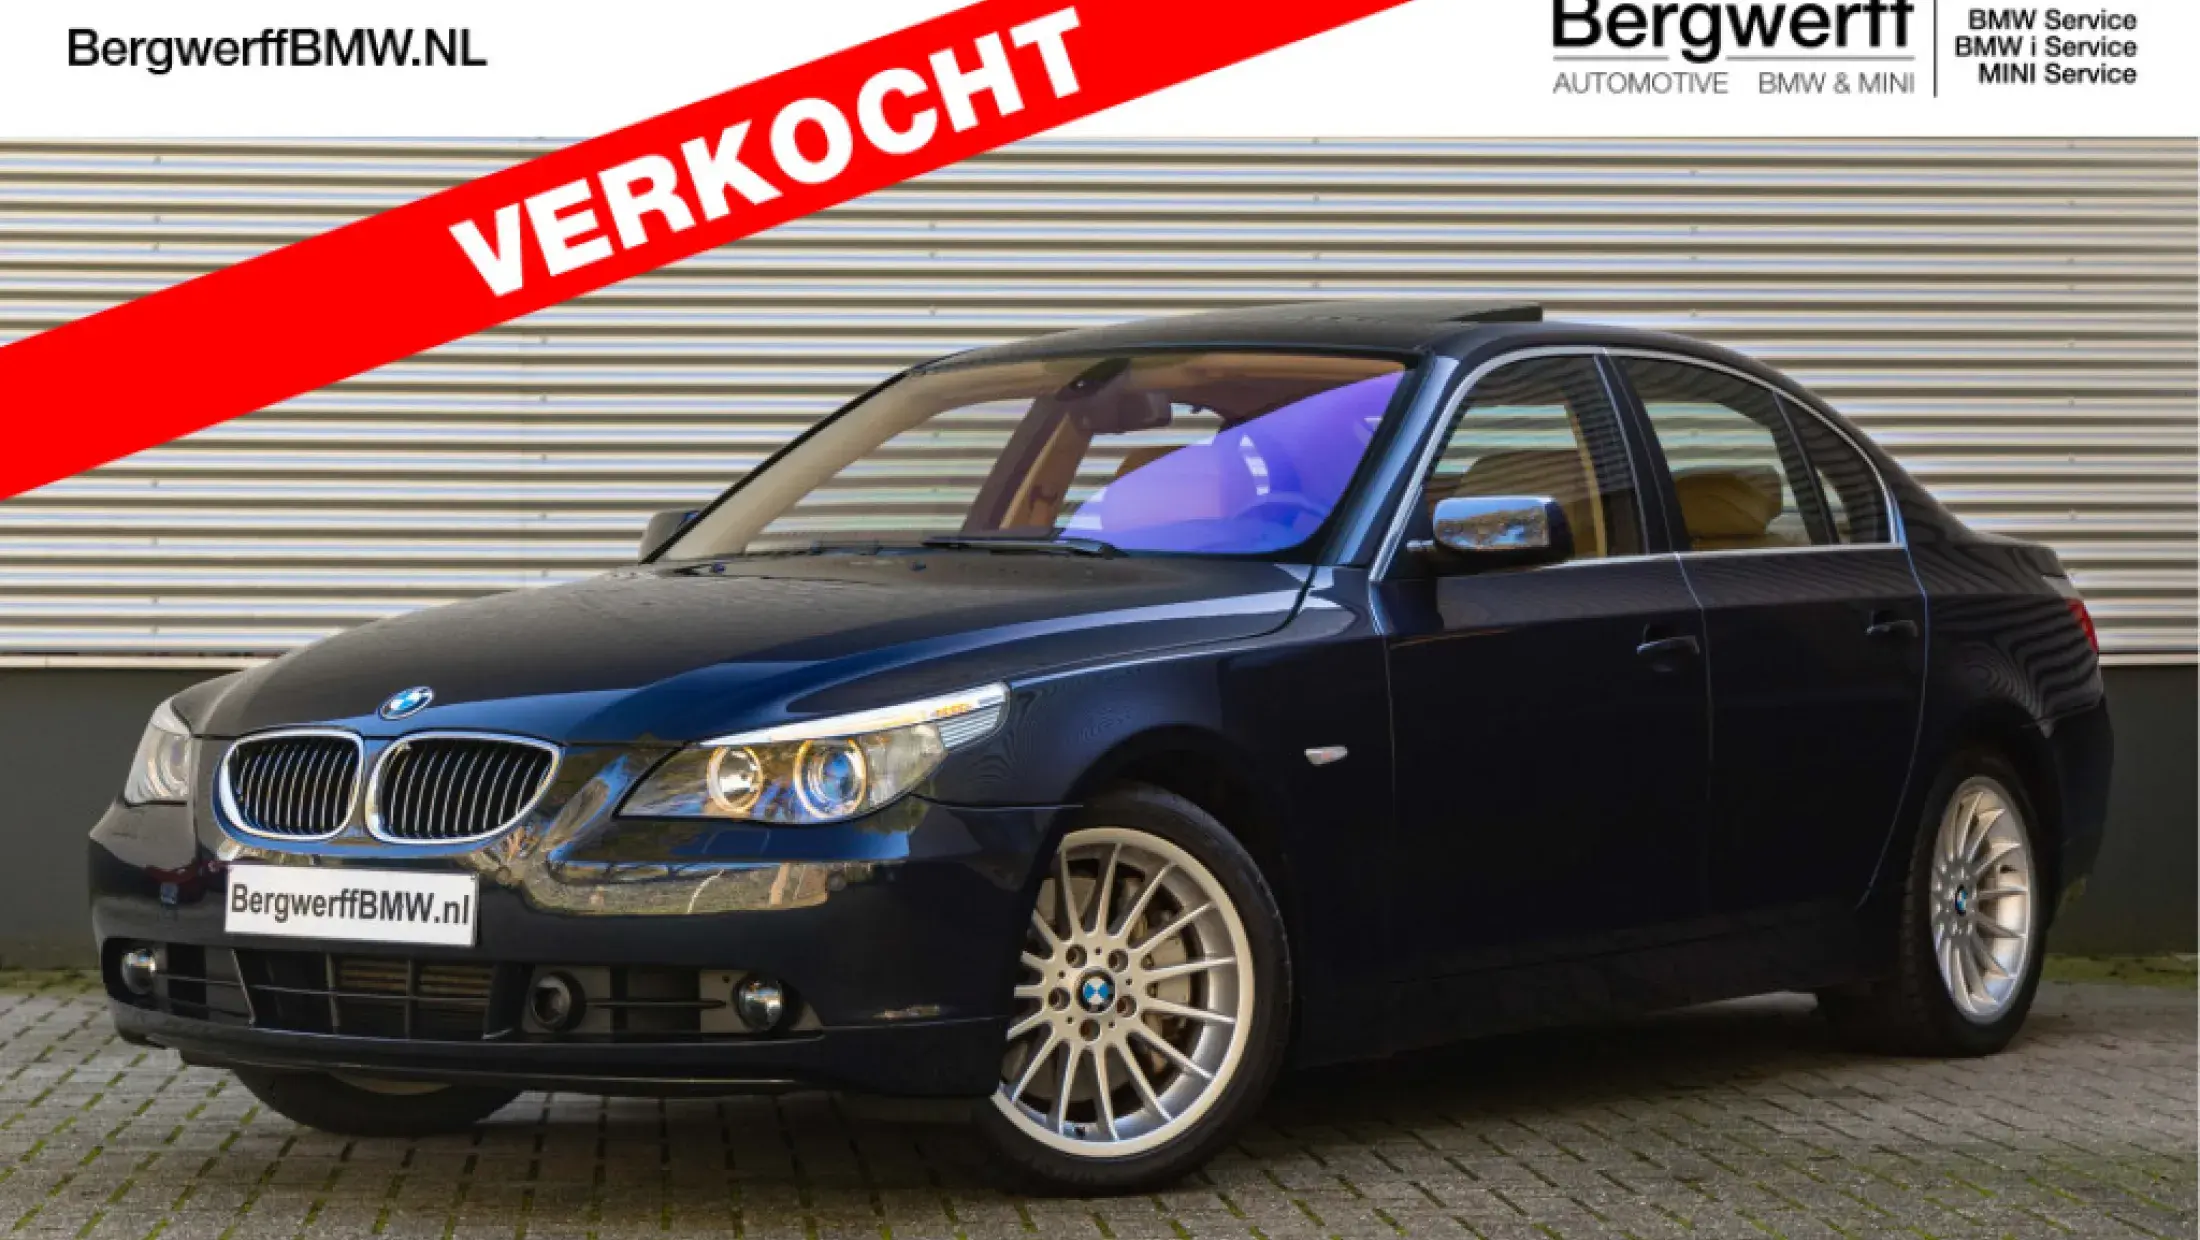 BMW 550i E60 Limousine - one owner - youngtimer - night vision 2